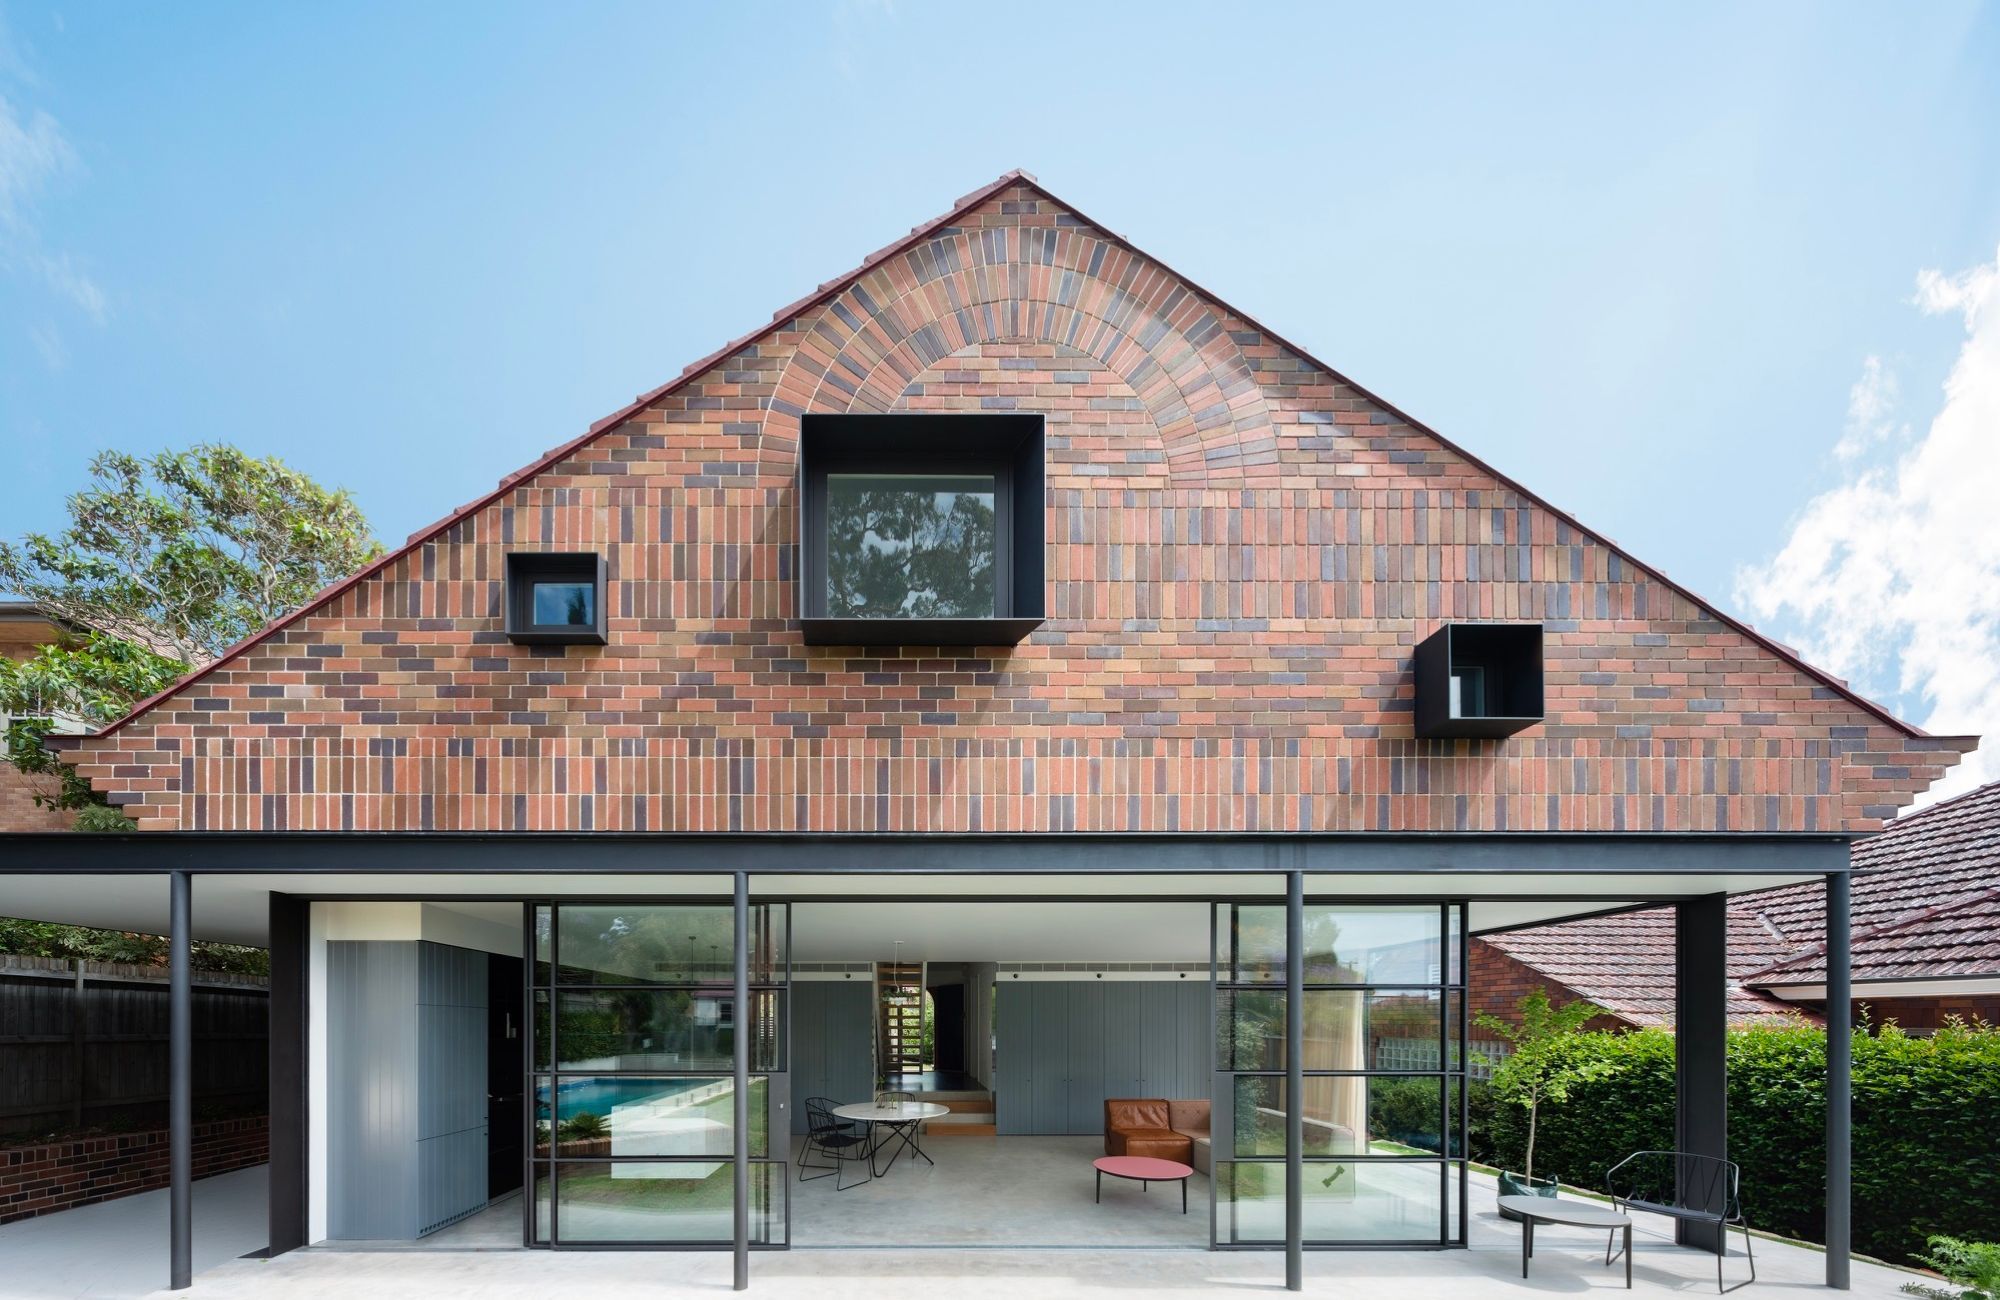 House Au Yeng by Tribe Studio Architects showing brick facade and steel doors